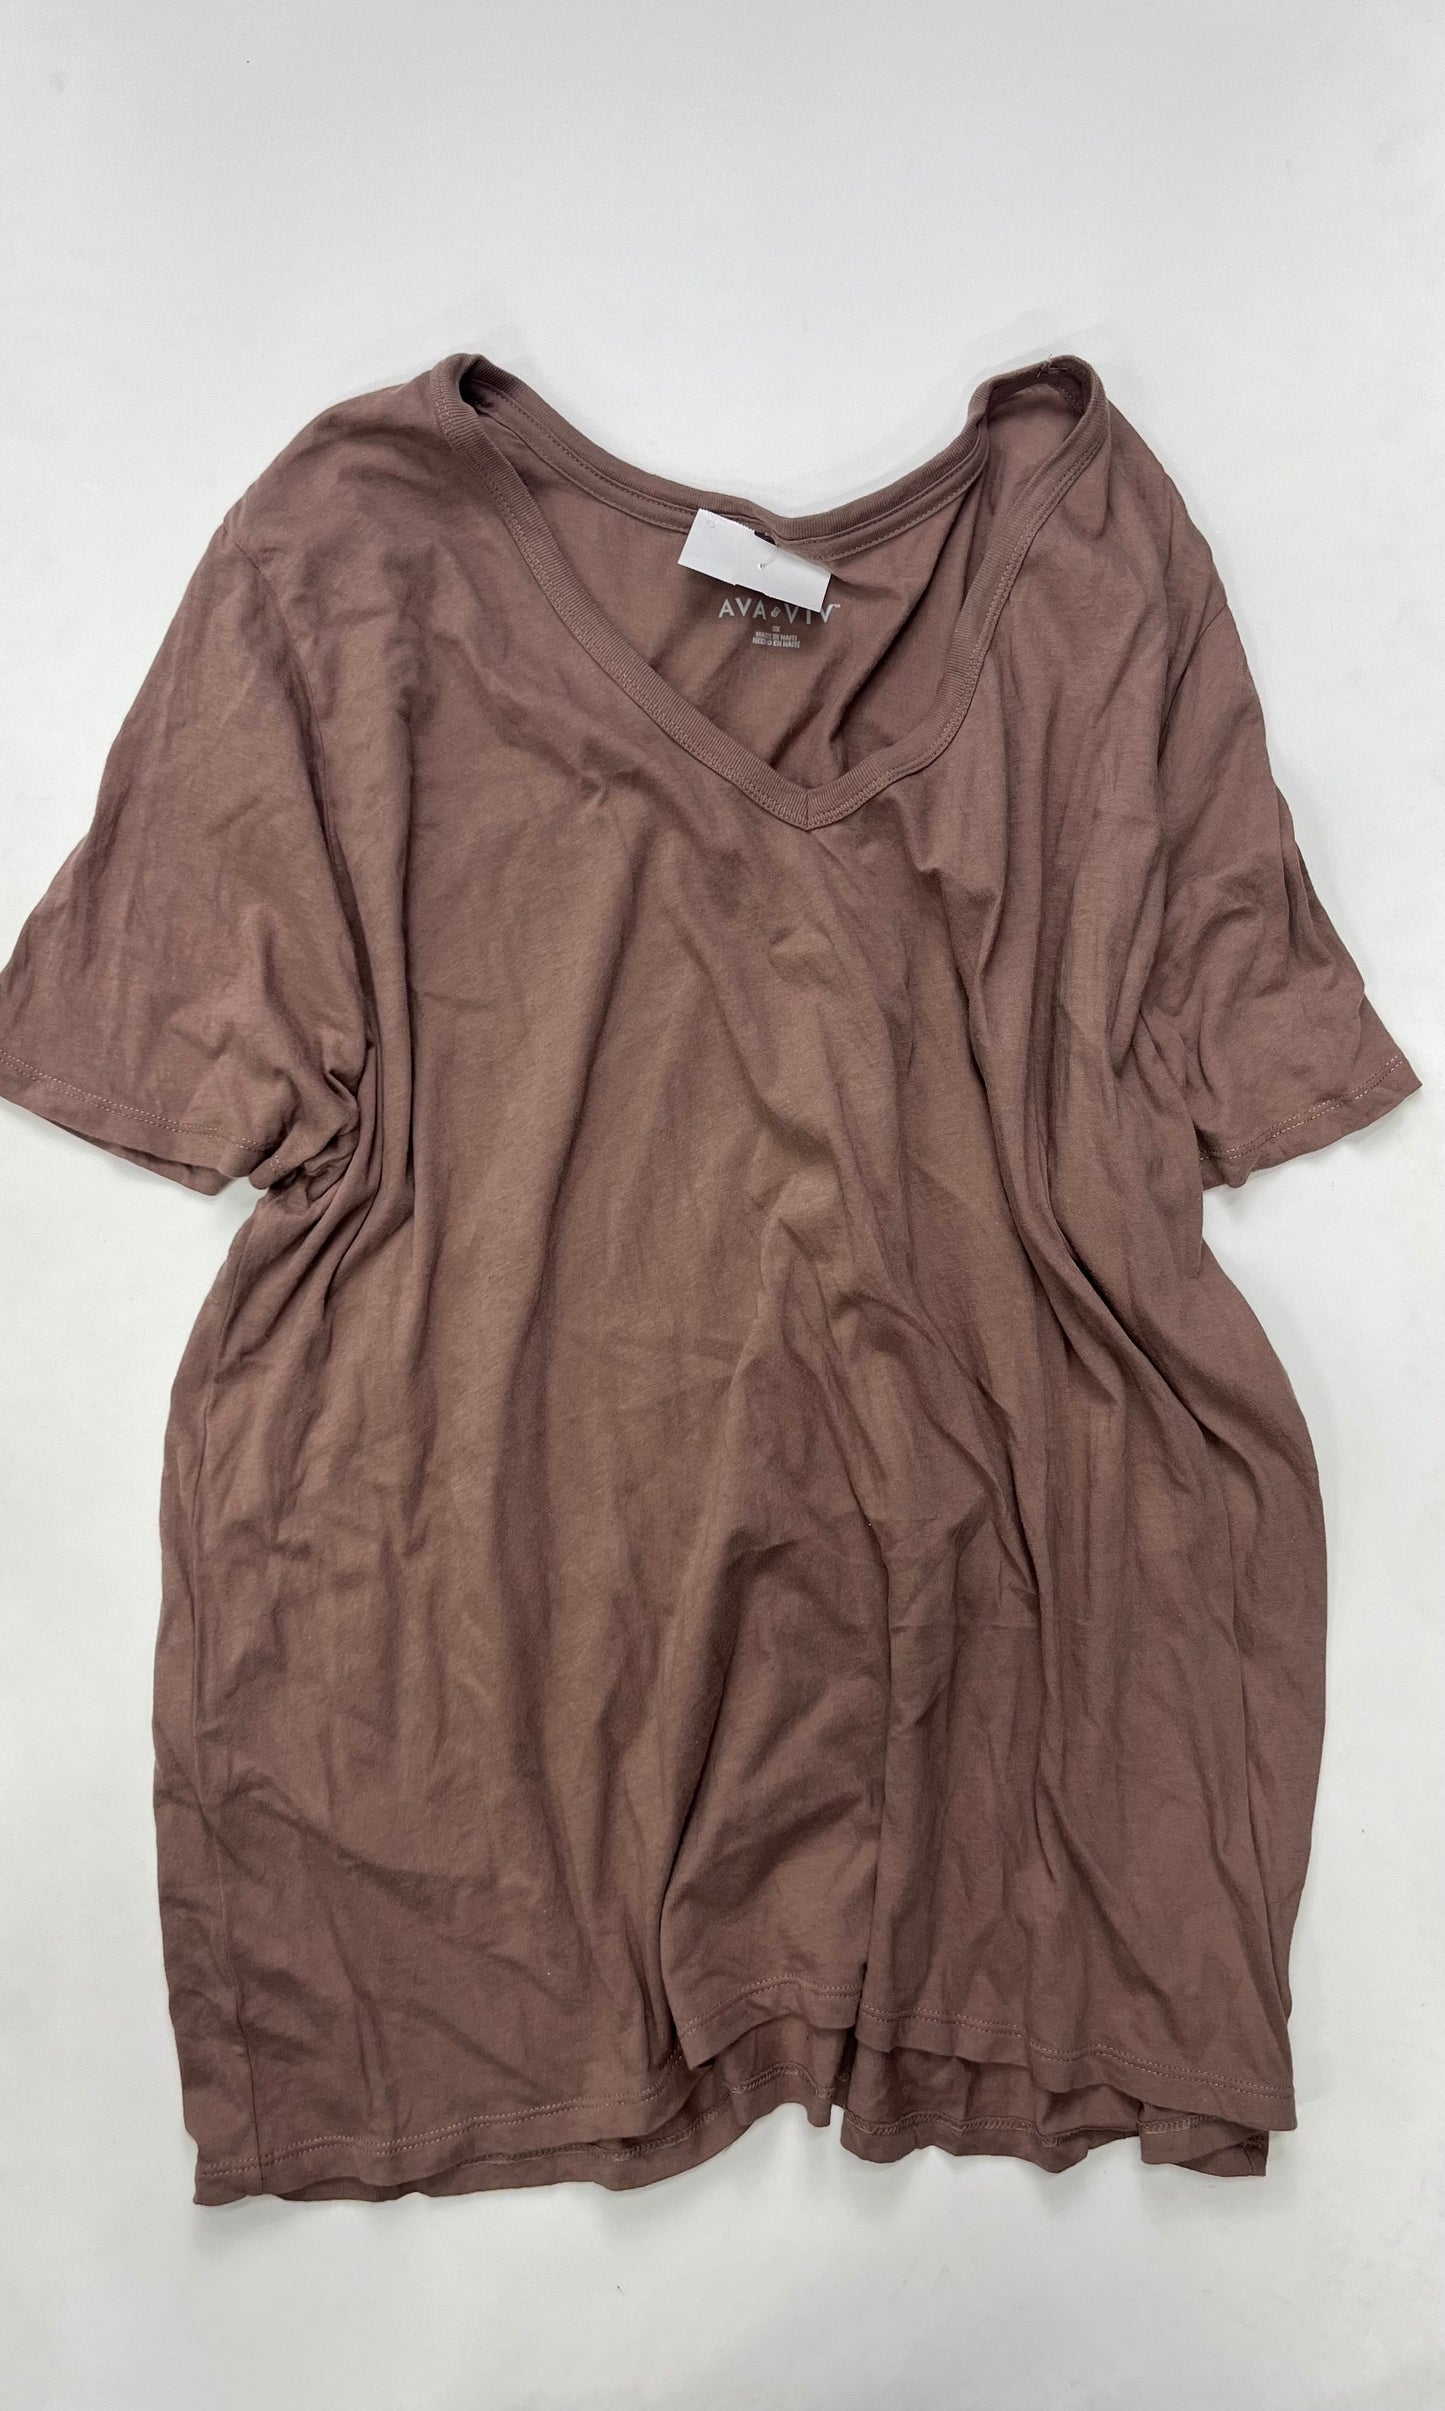 Taupe Top Short Sleeve Ava & Viv, Size 3x